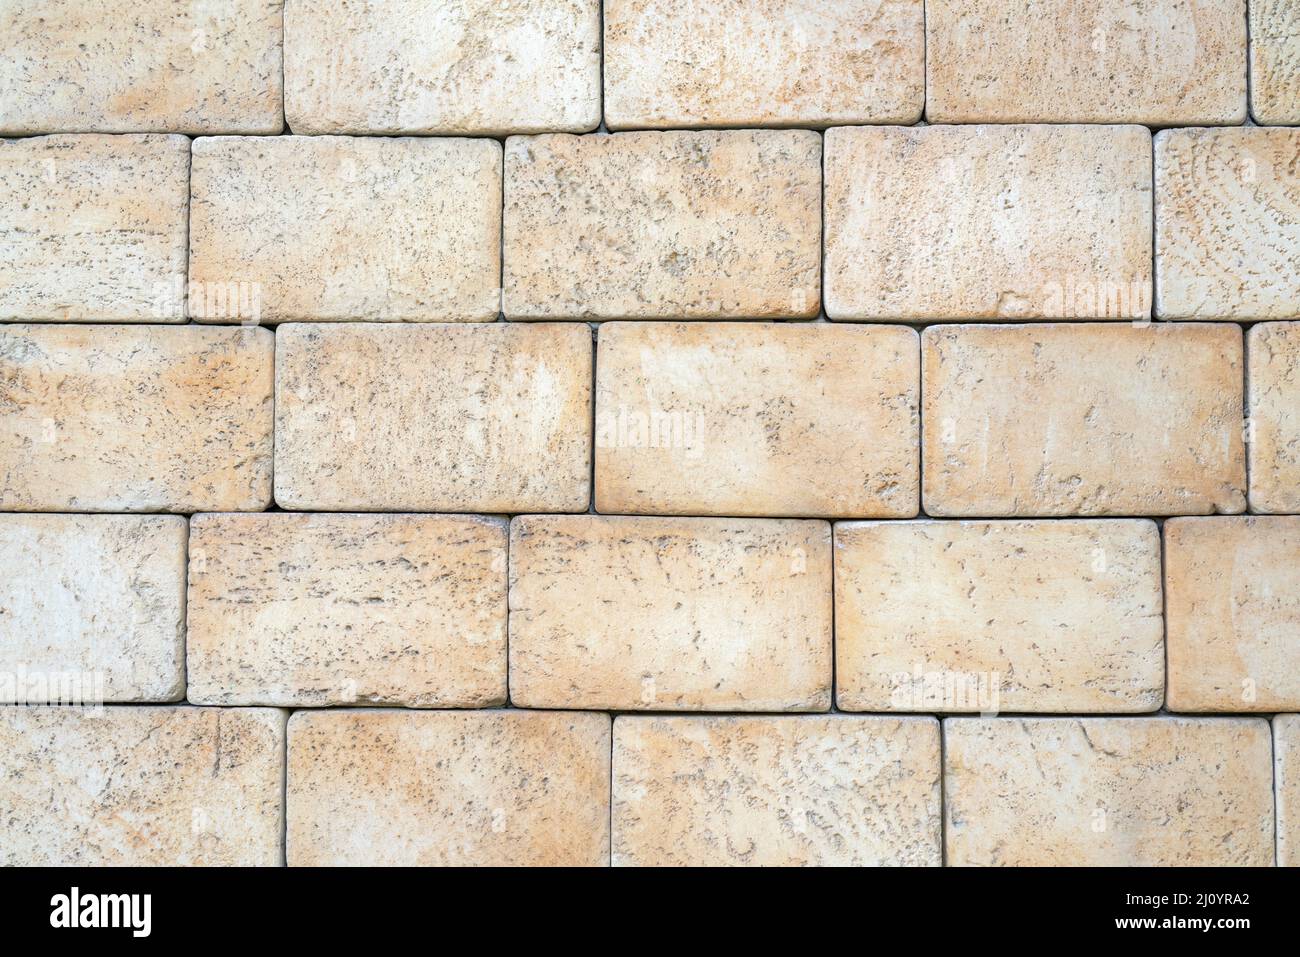 Texture of yellow brick made of sandstone and limestone. The wall of the house. Stock Photo